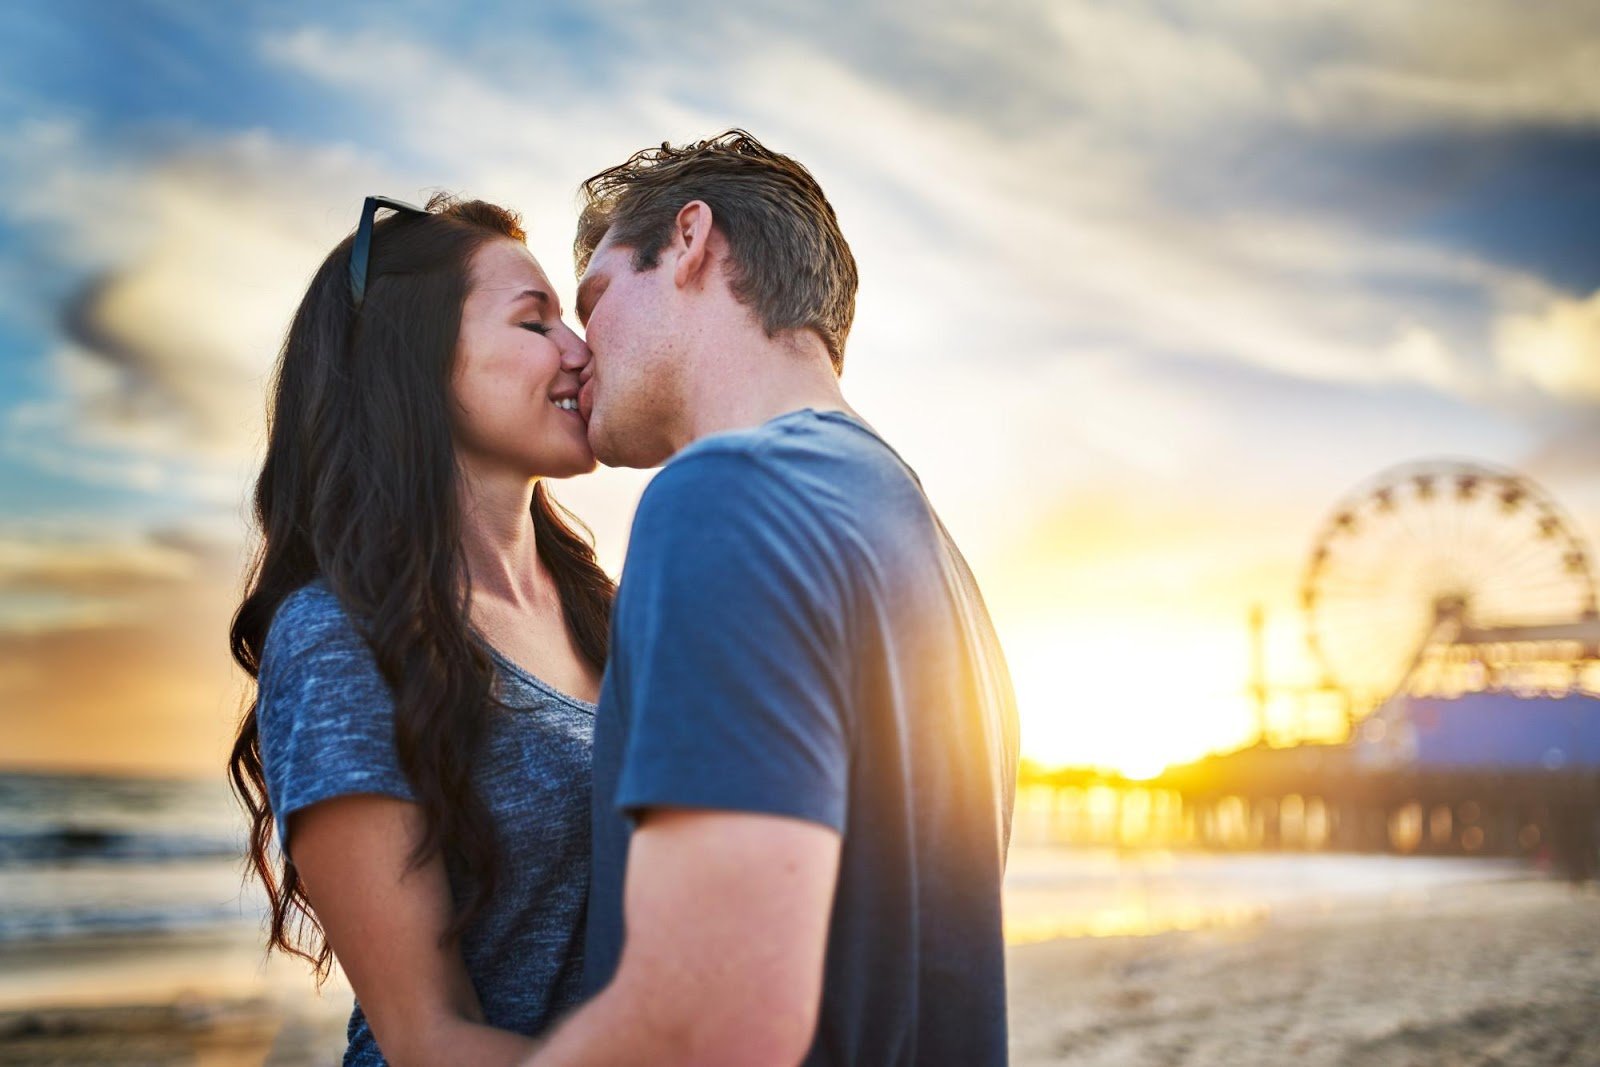 100 Cute Date Ideas To Really Up The Romance